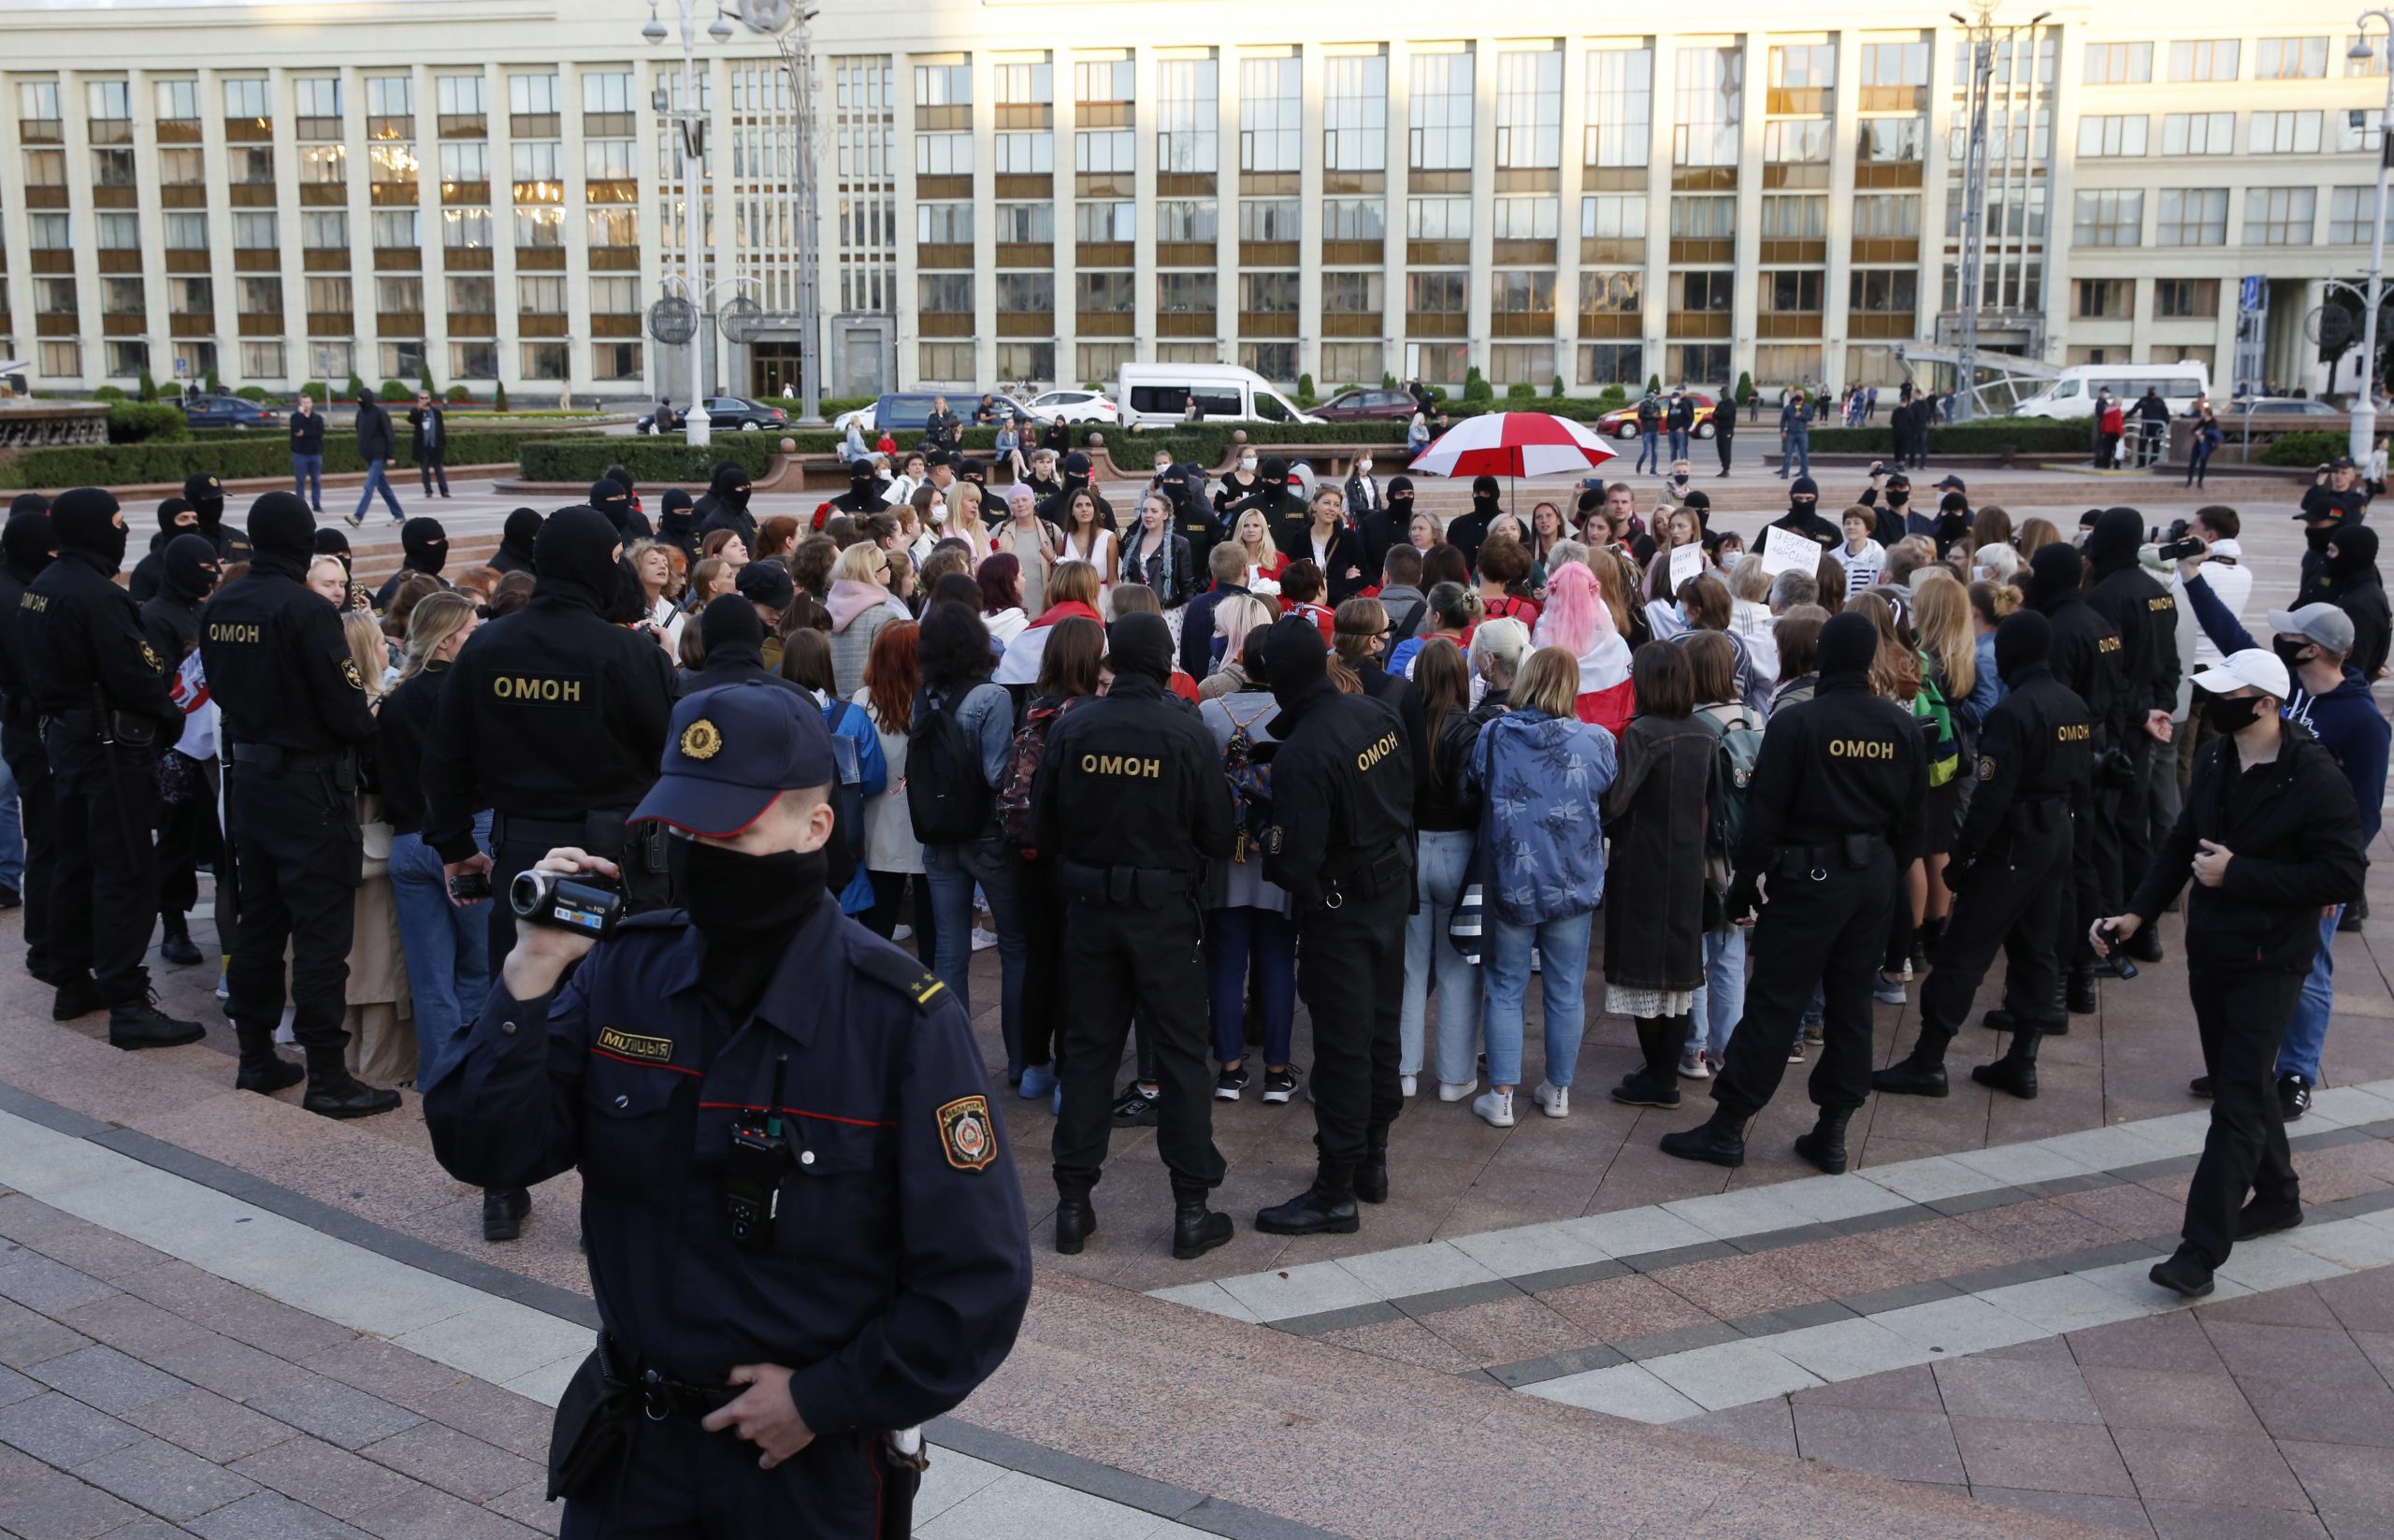 epa08632492 Belarus women are surronded by Police during a peaceful protest rally against the results of the presidential elections, in Minsk, Belarus 28 August 2020. Opposition protests in Belarus continue against alleges poll-rigging and police violence at protests following election results claiming that president Lukashenko had won a landslide victory in the 09 August elections.  EPA/TATYANA ZENKOVICH